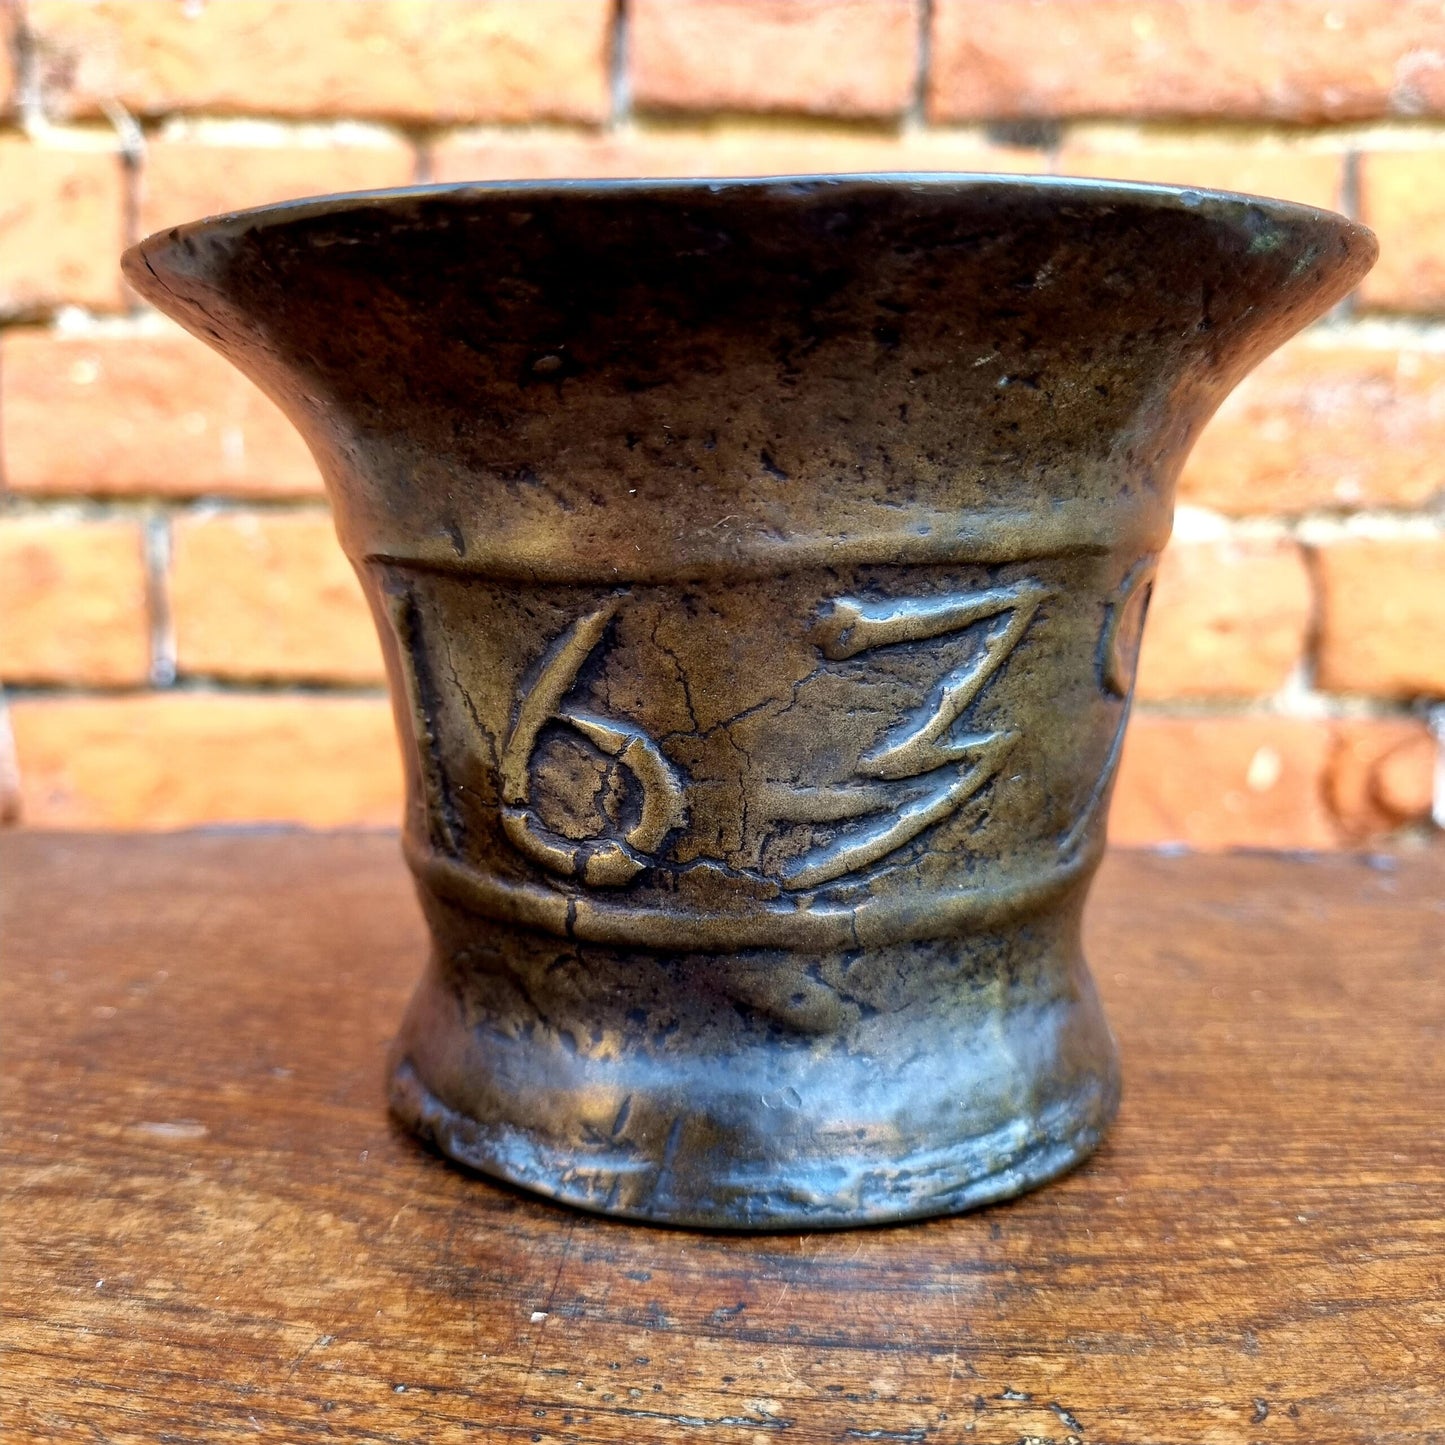 Early 17th Century Charles I Period English Antique Bronze Mortar Dated "1639"